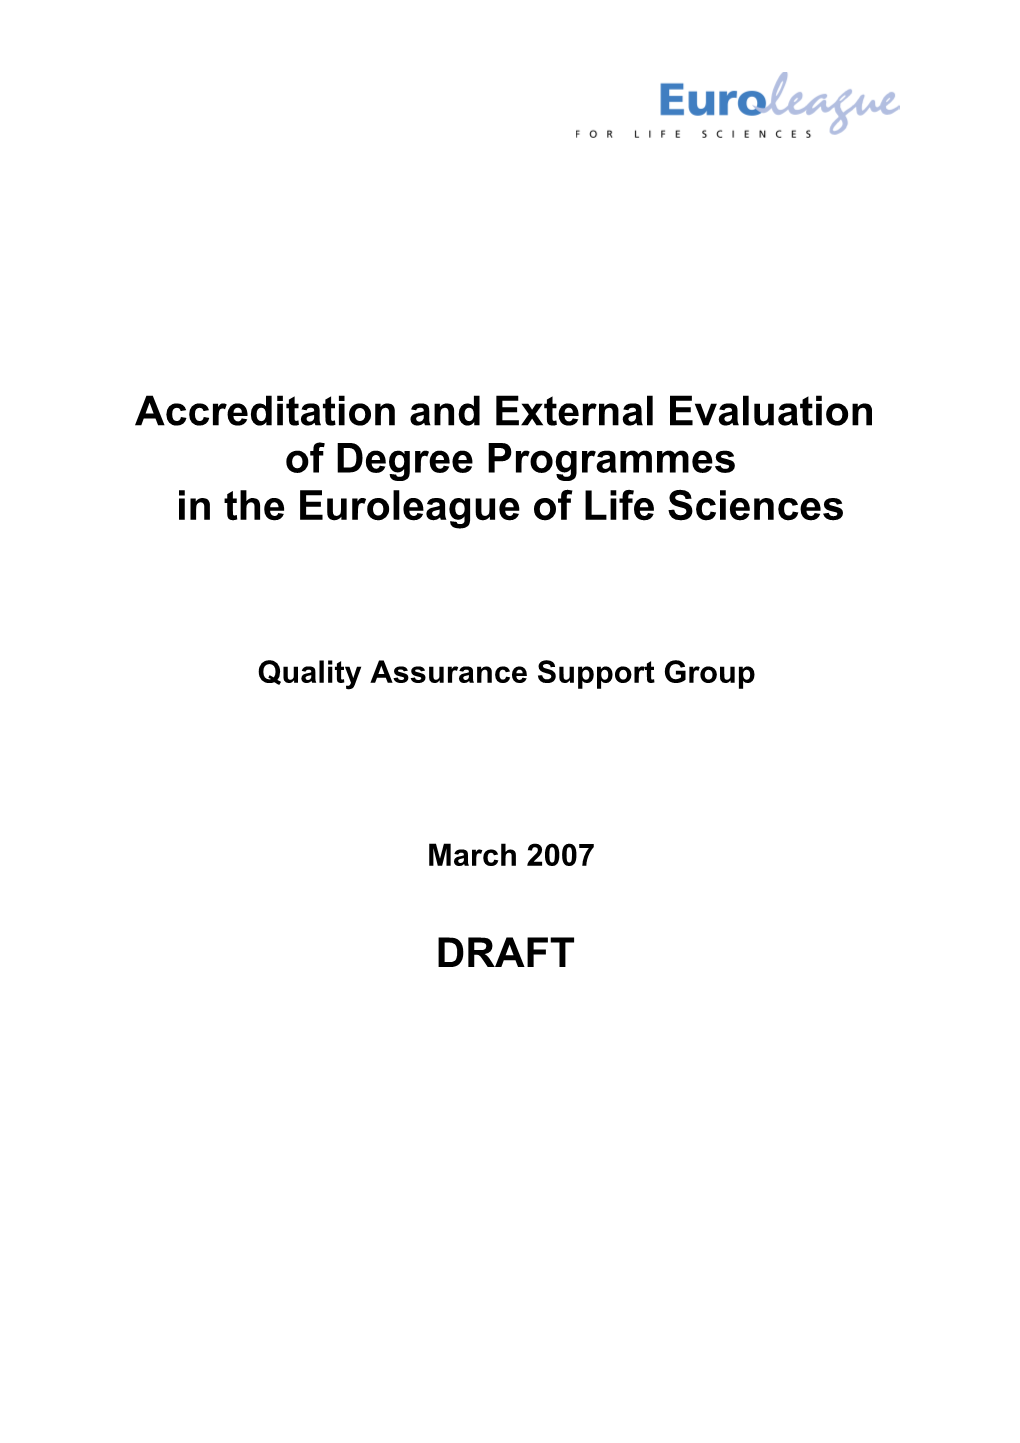 Outline Accreditation and External Evaluation in the Euroleague